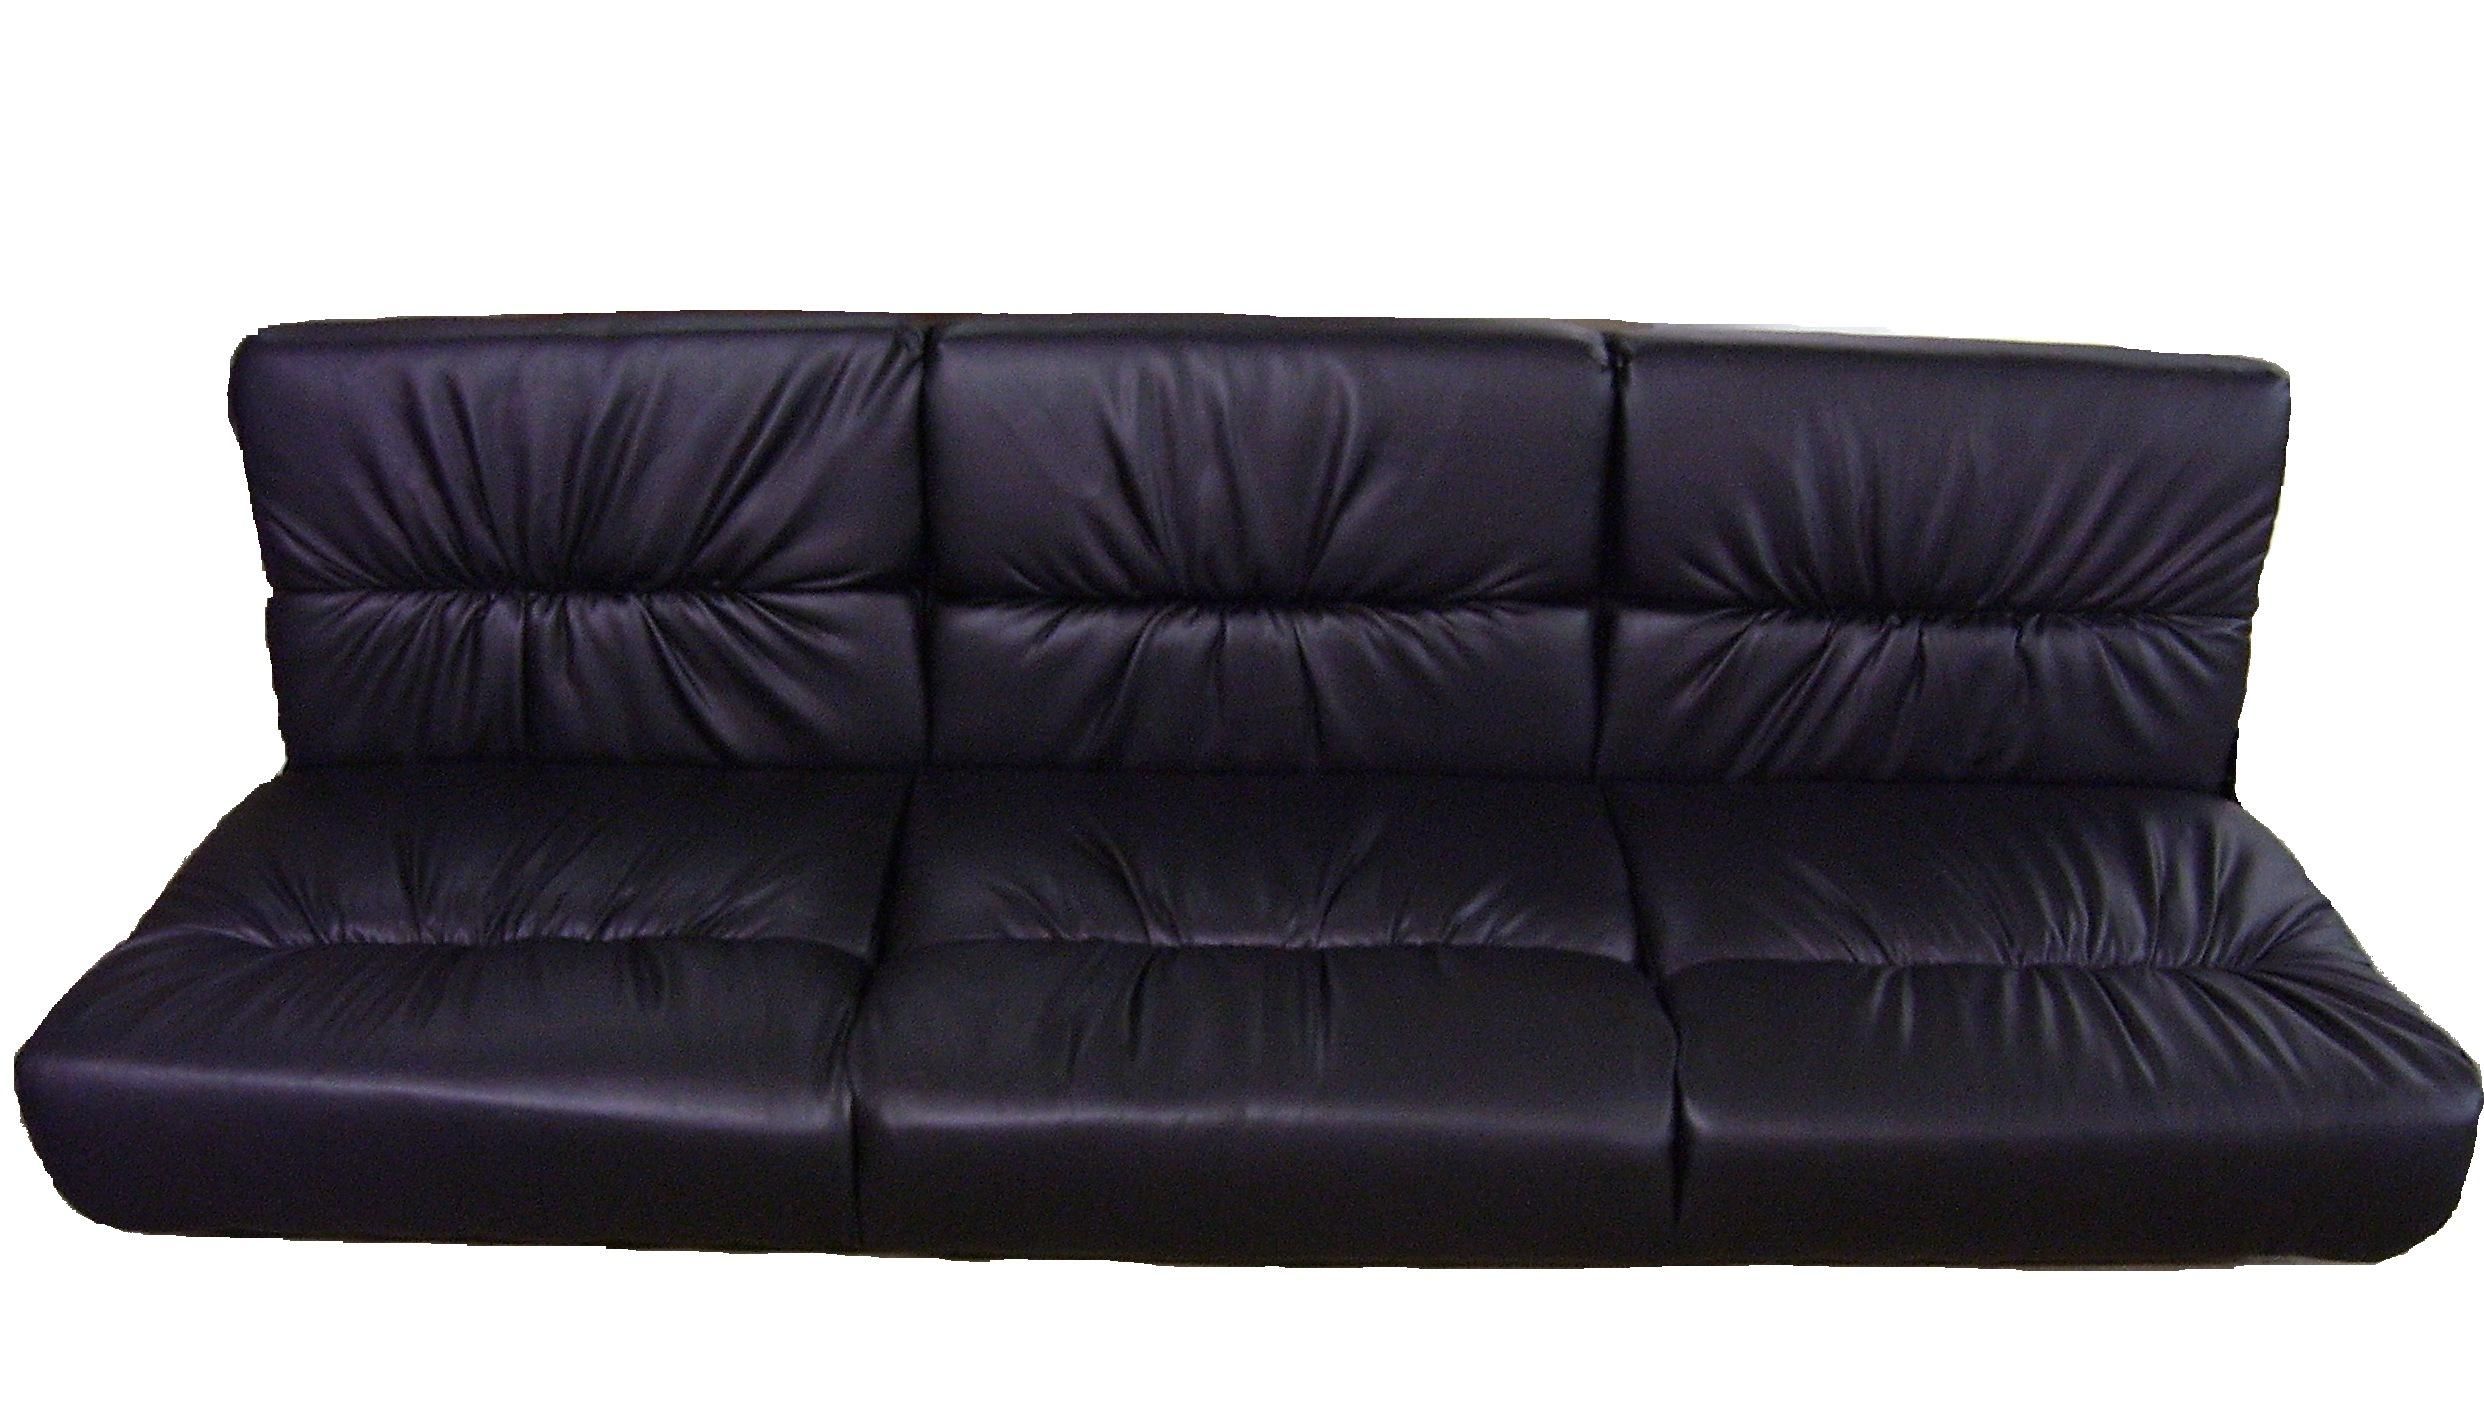 20 Best Ideas Rv Jackknife Sofas | Sofa Ideas Regarding Sectional Sofas For Campers (Photo 10 of 10)